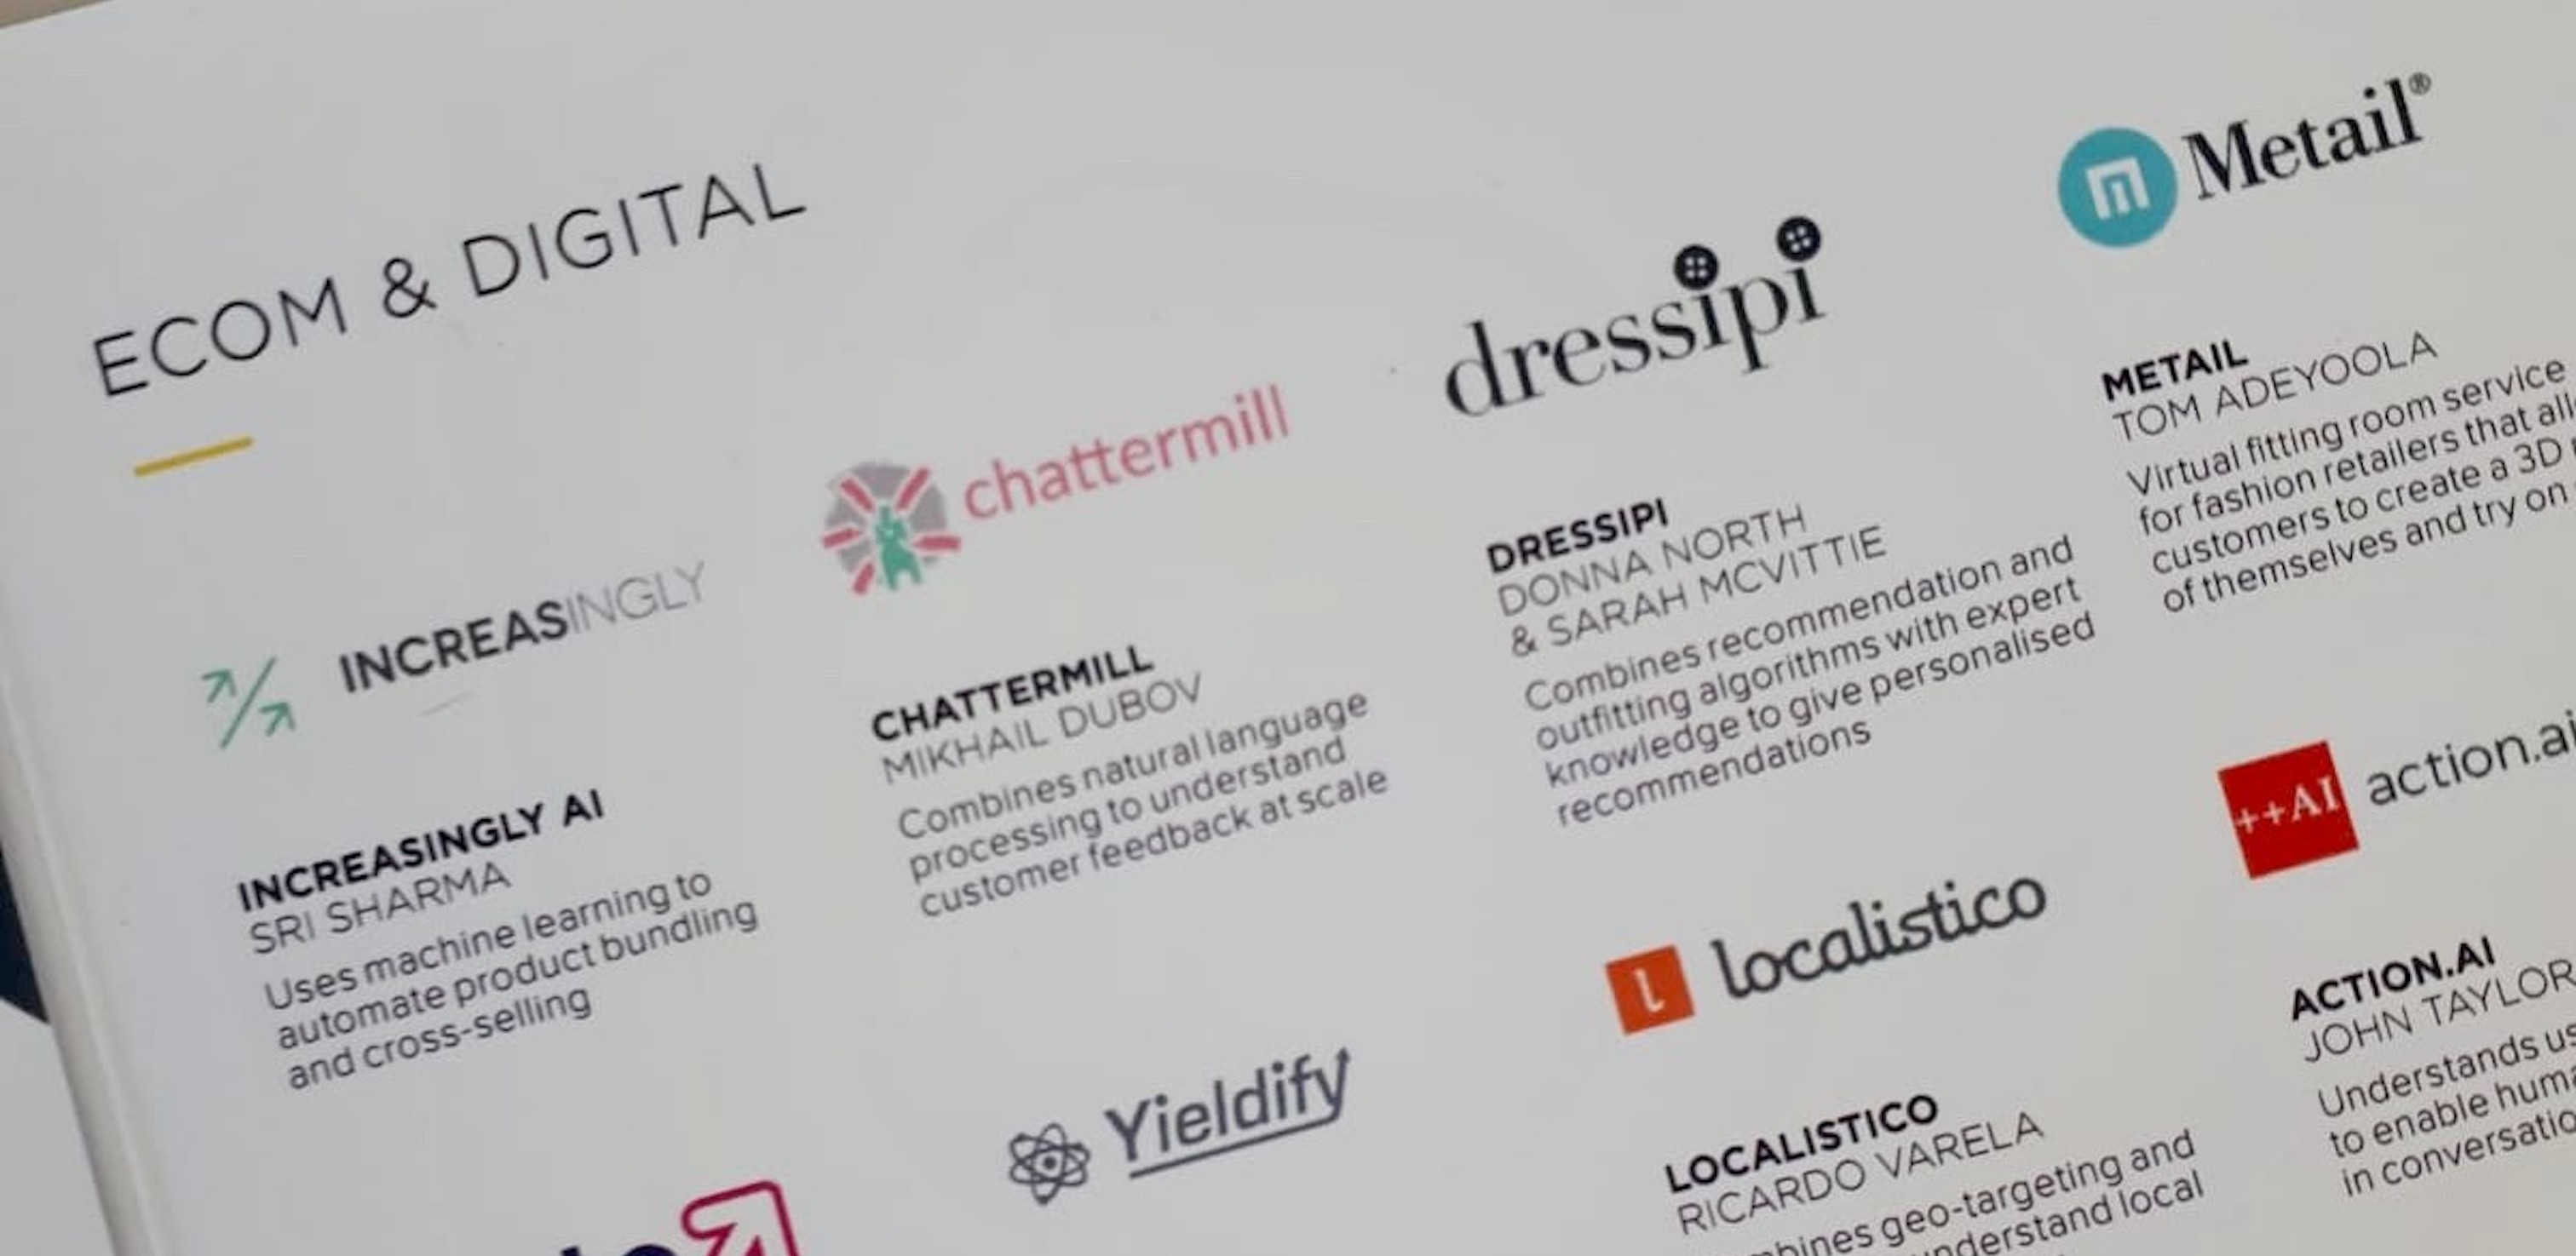 Image of the London's Retail Tech Catalogue showing Dressipi as one of the top 50 UK retail tech companies